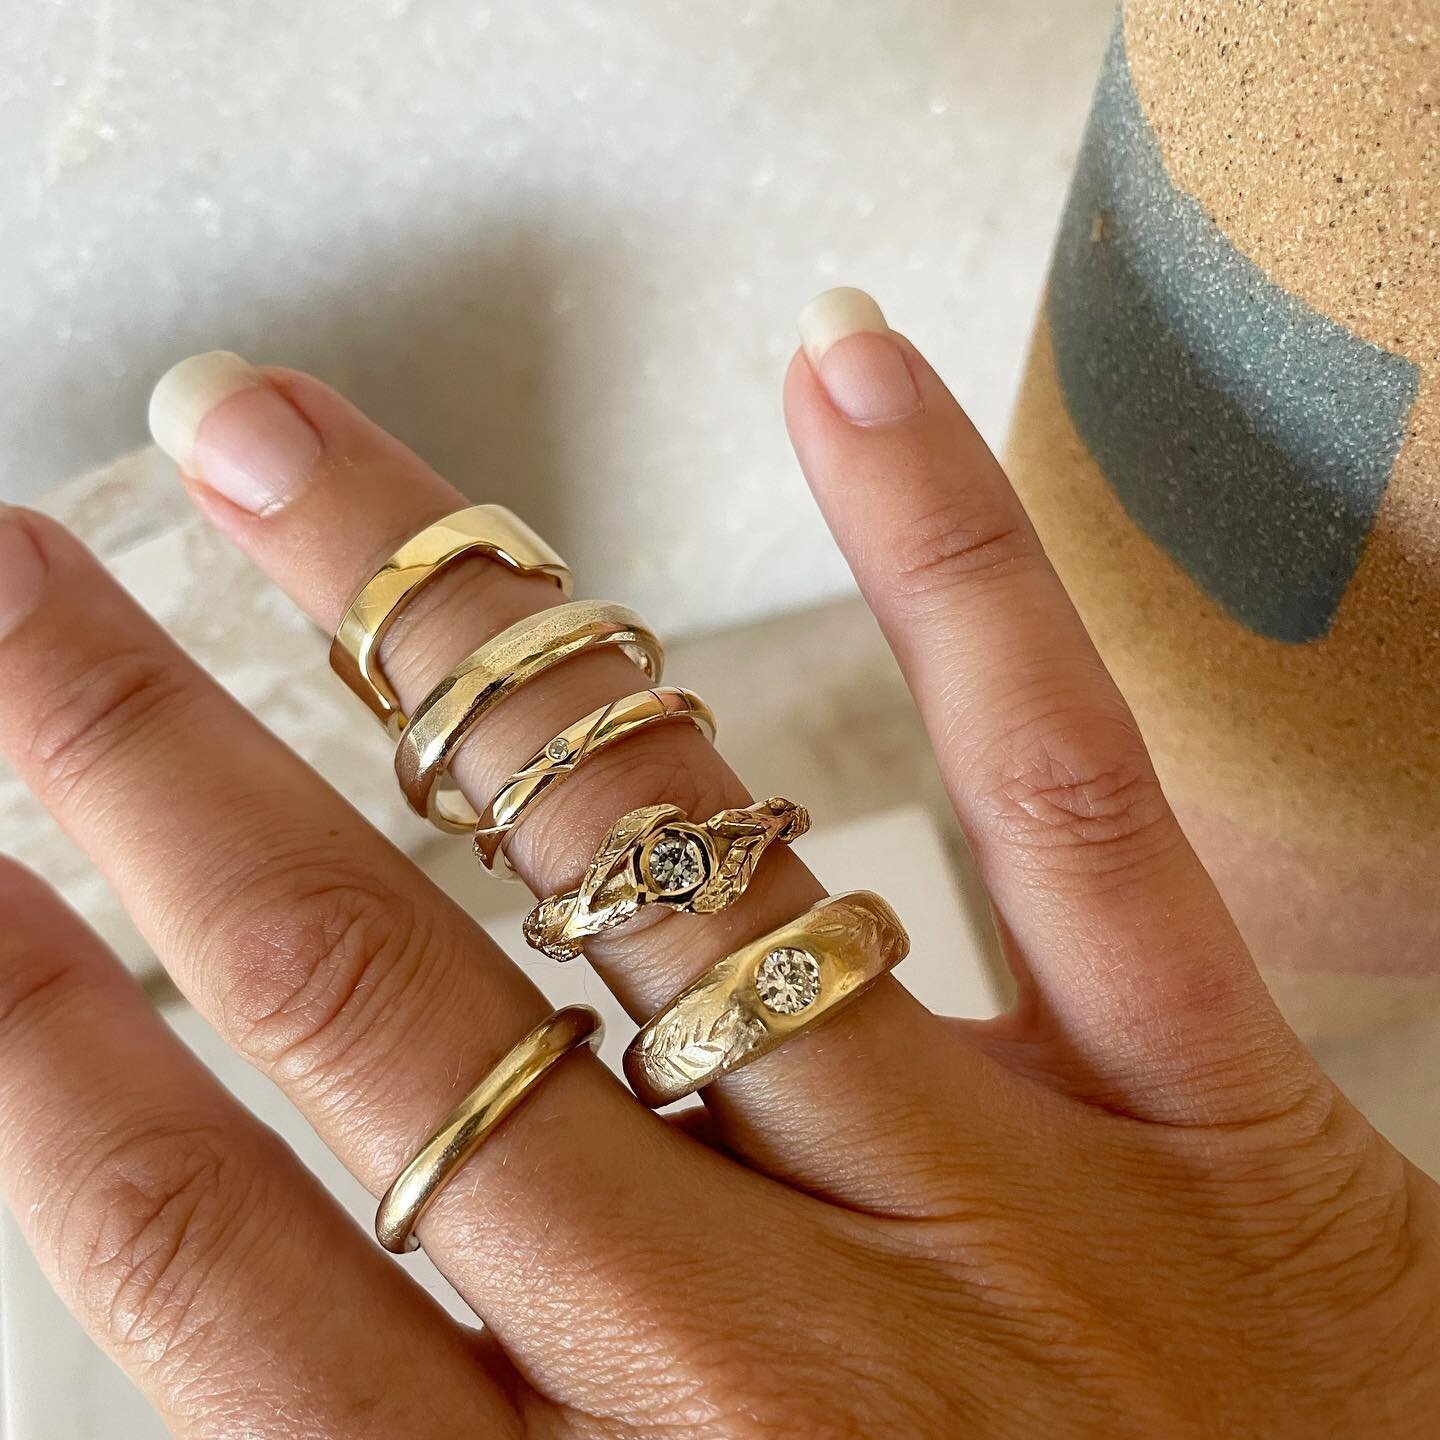 So many delicious rings coming out of the studio this week! Can you spot yours? 

I have added 2 slots only for the 20th august if anyone wants to book in a bespoke appointment to discuss ideas. DM me or head to the appointments page of the website.